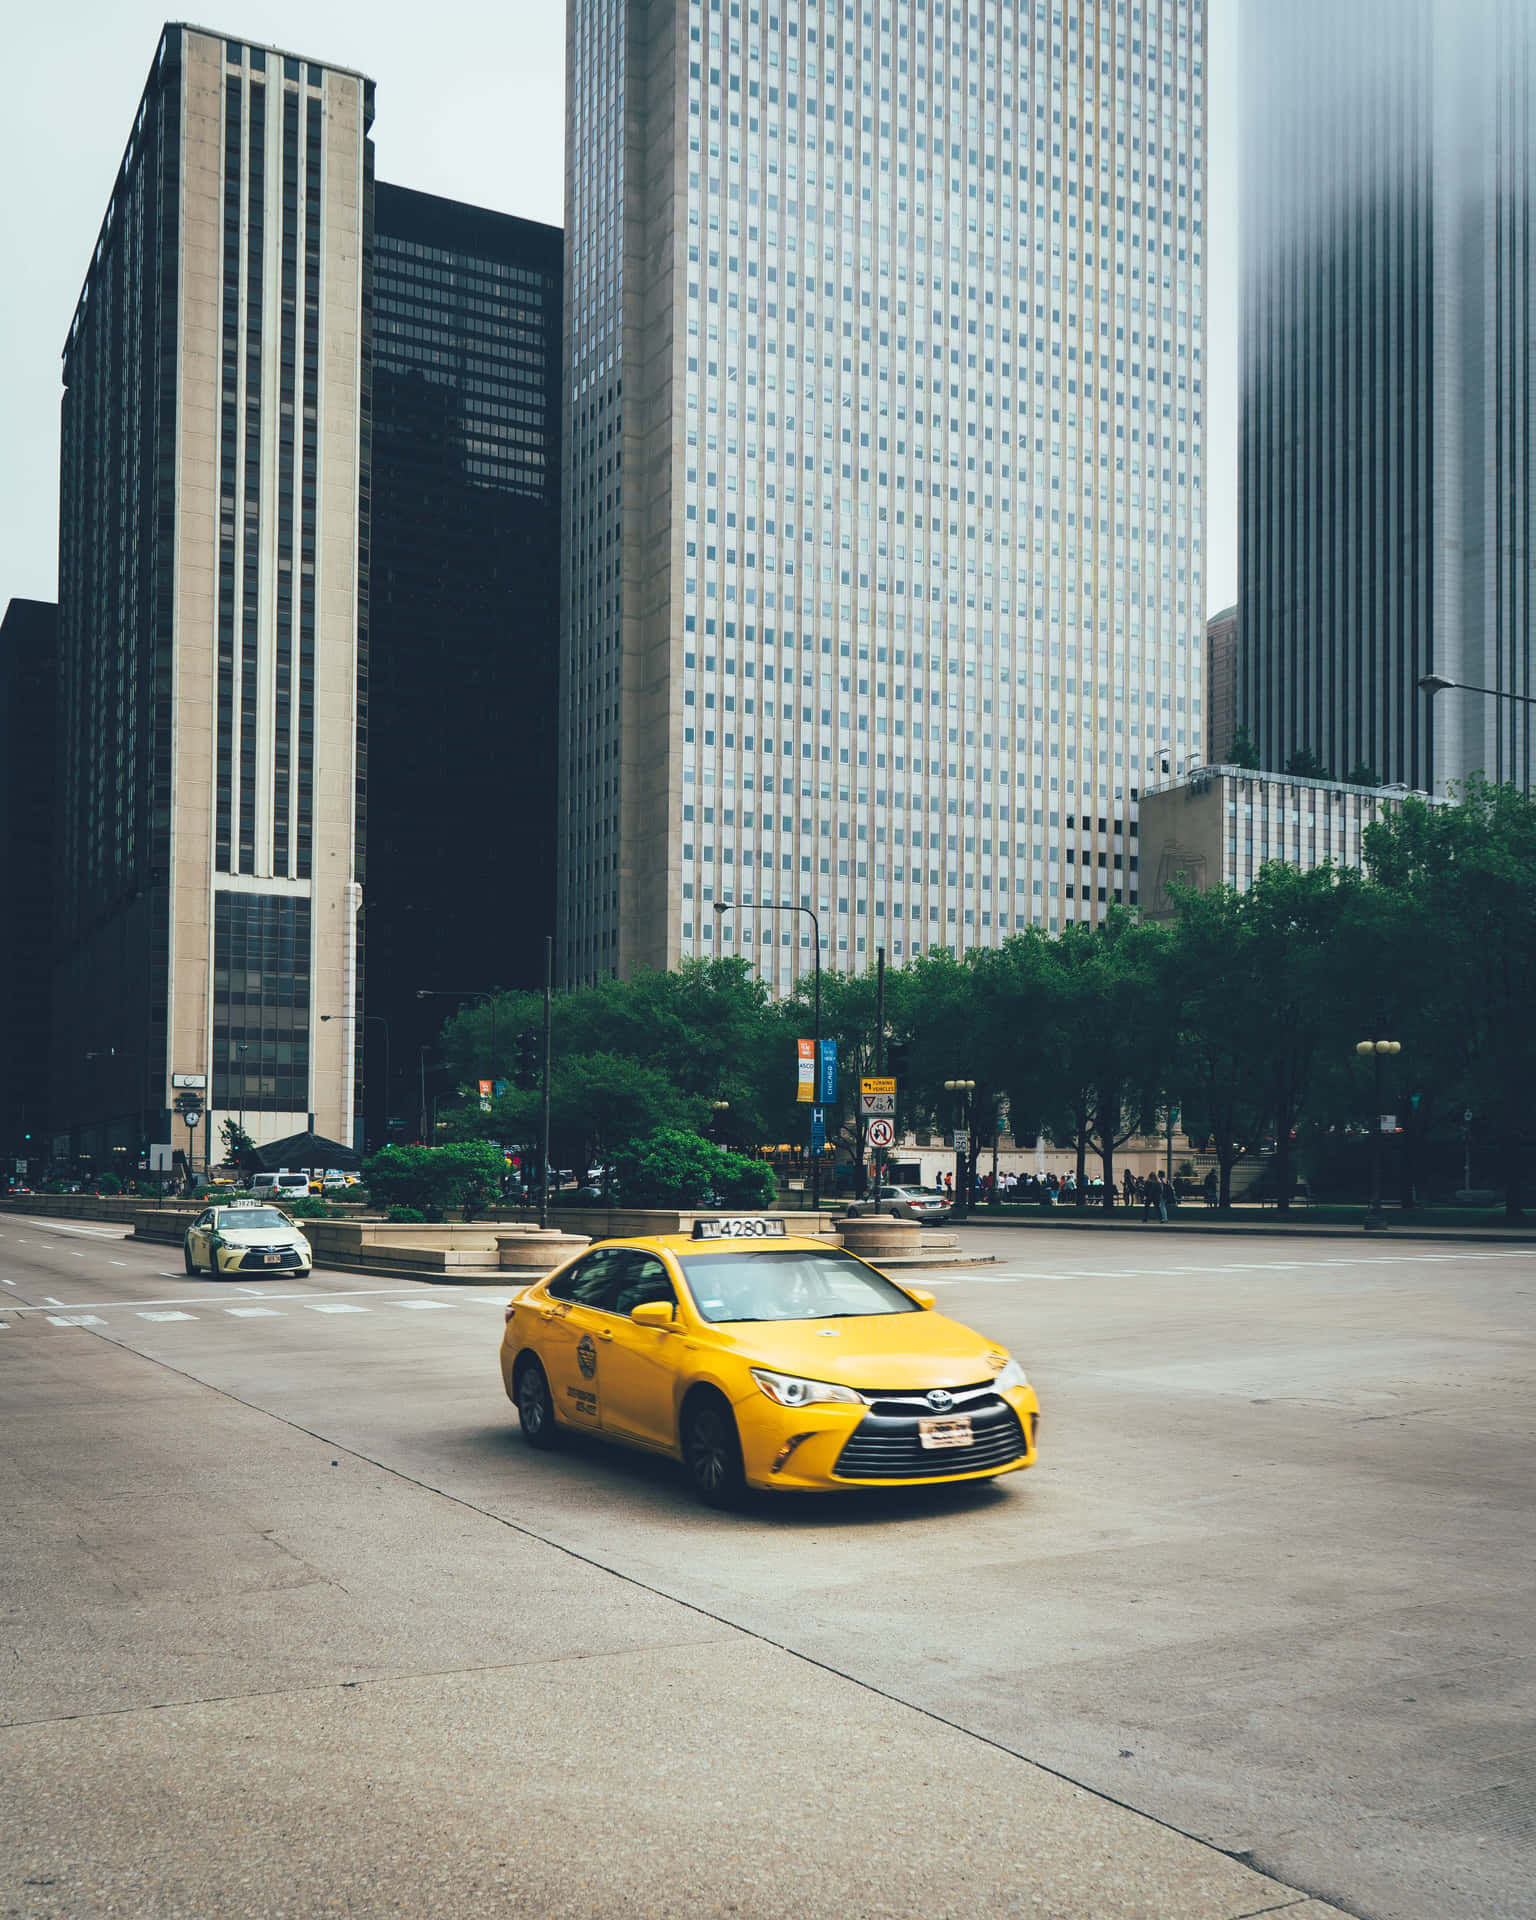 Yellow Cab in the city streets Wallpaper